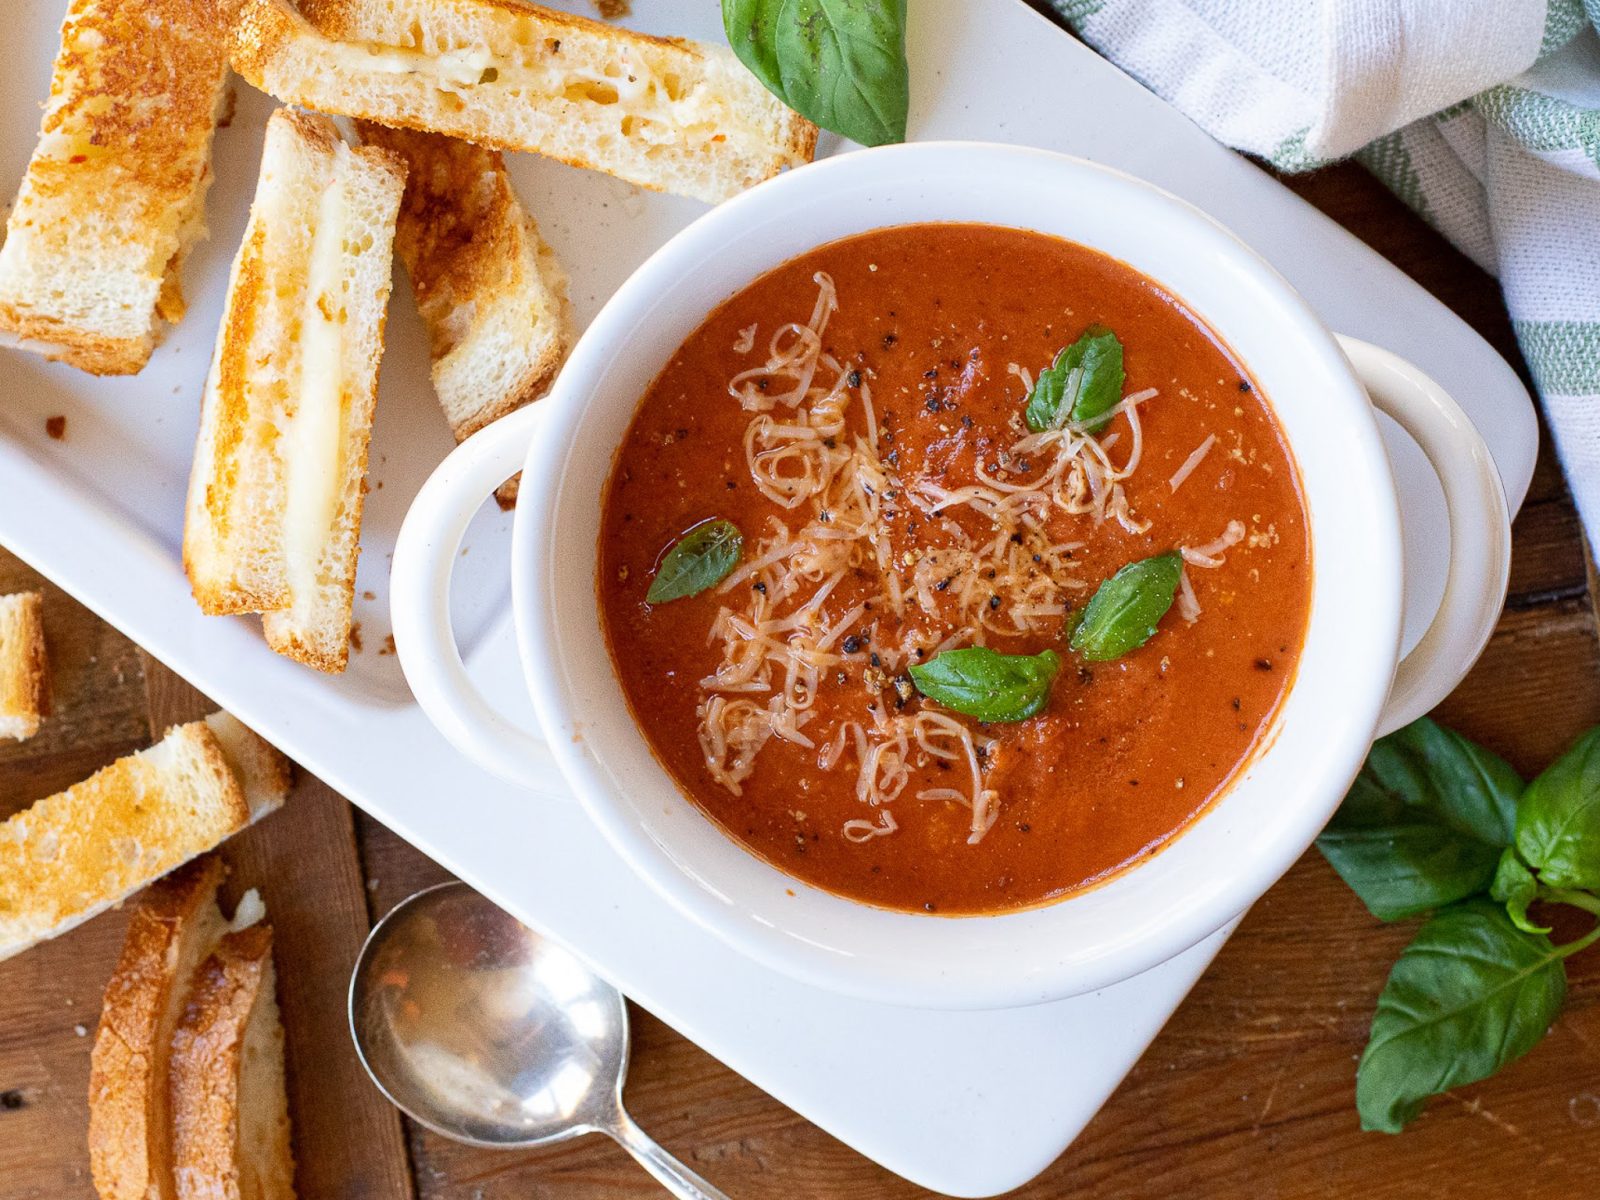 Serve Up A Tasty Air Fryer Grilled Cheese Sandwich With Tomato Soup + Stock Your Pantry & Save At Publix!